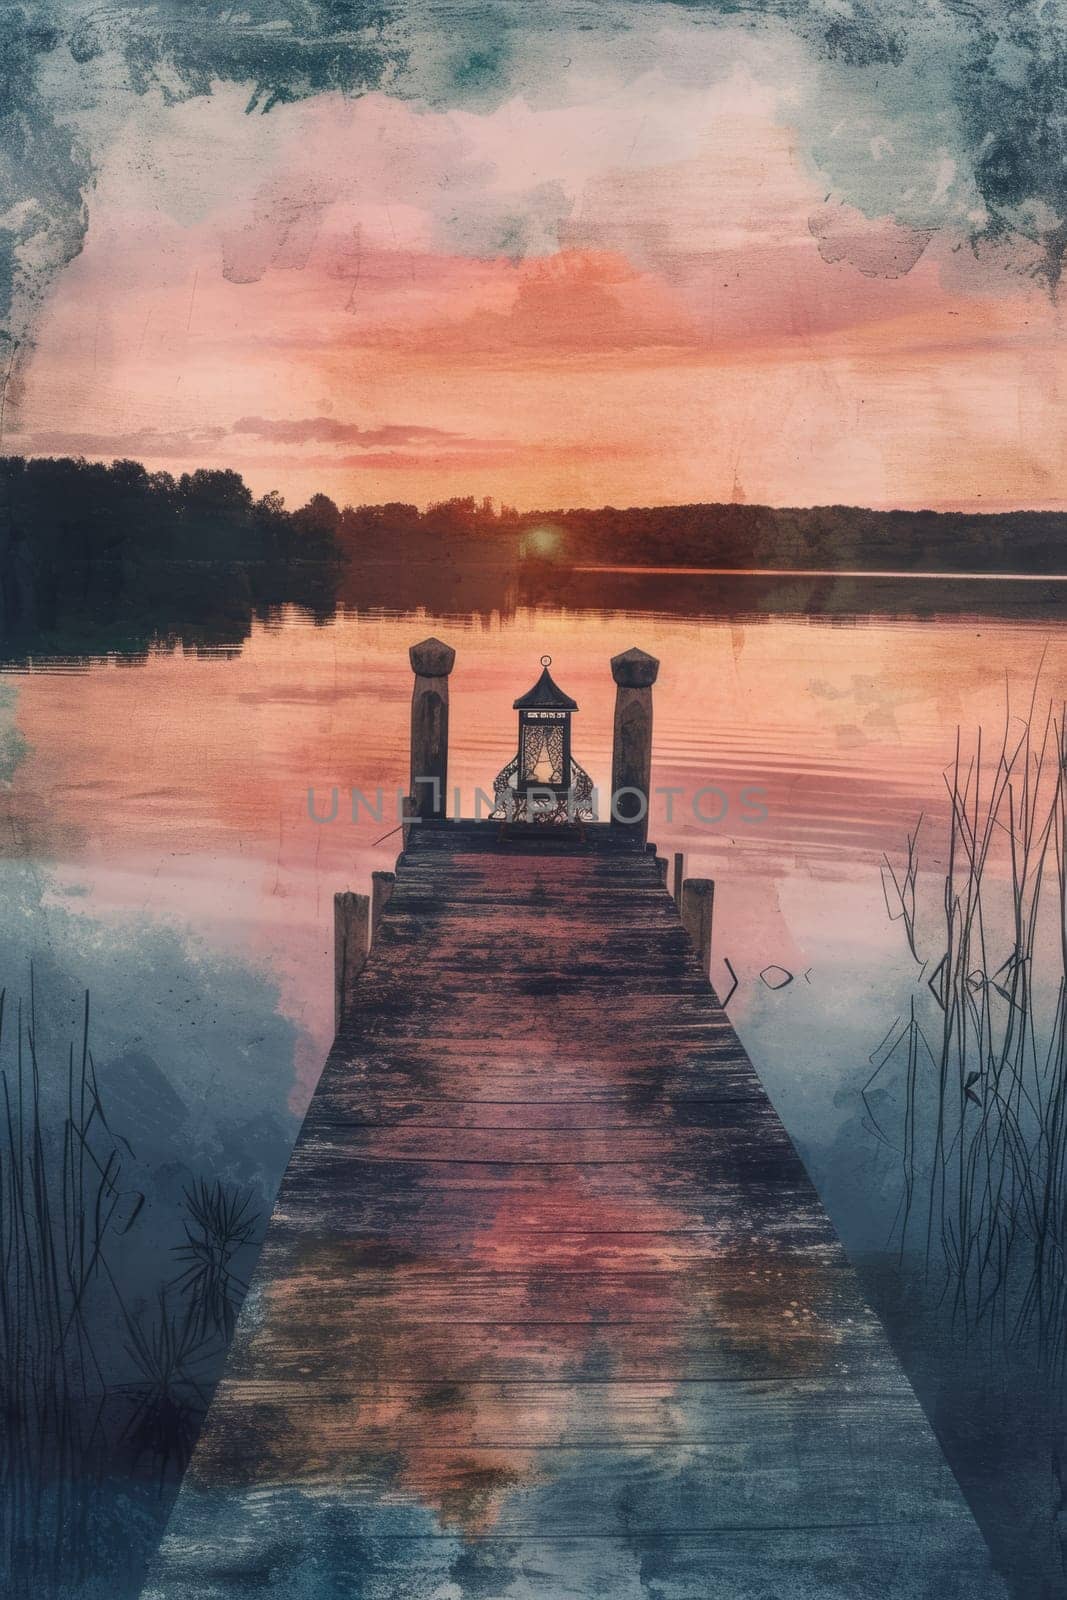 Calm sunset over a serene lake viewed from an old wooden pier with a solitary lantern. by sfinks